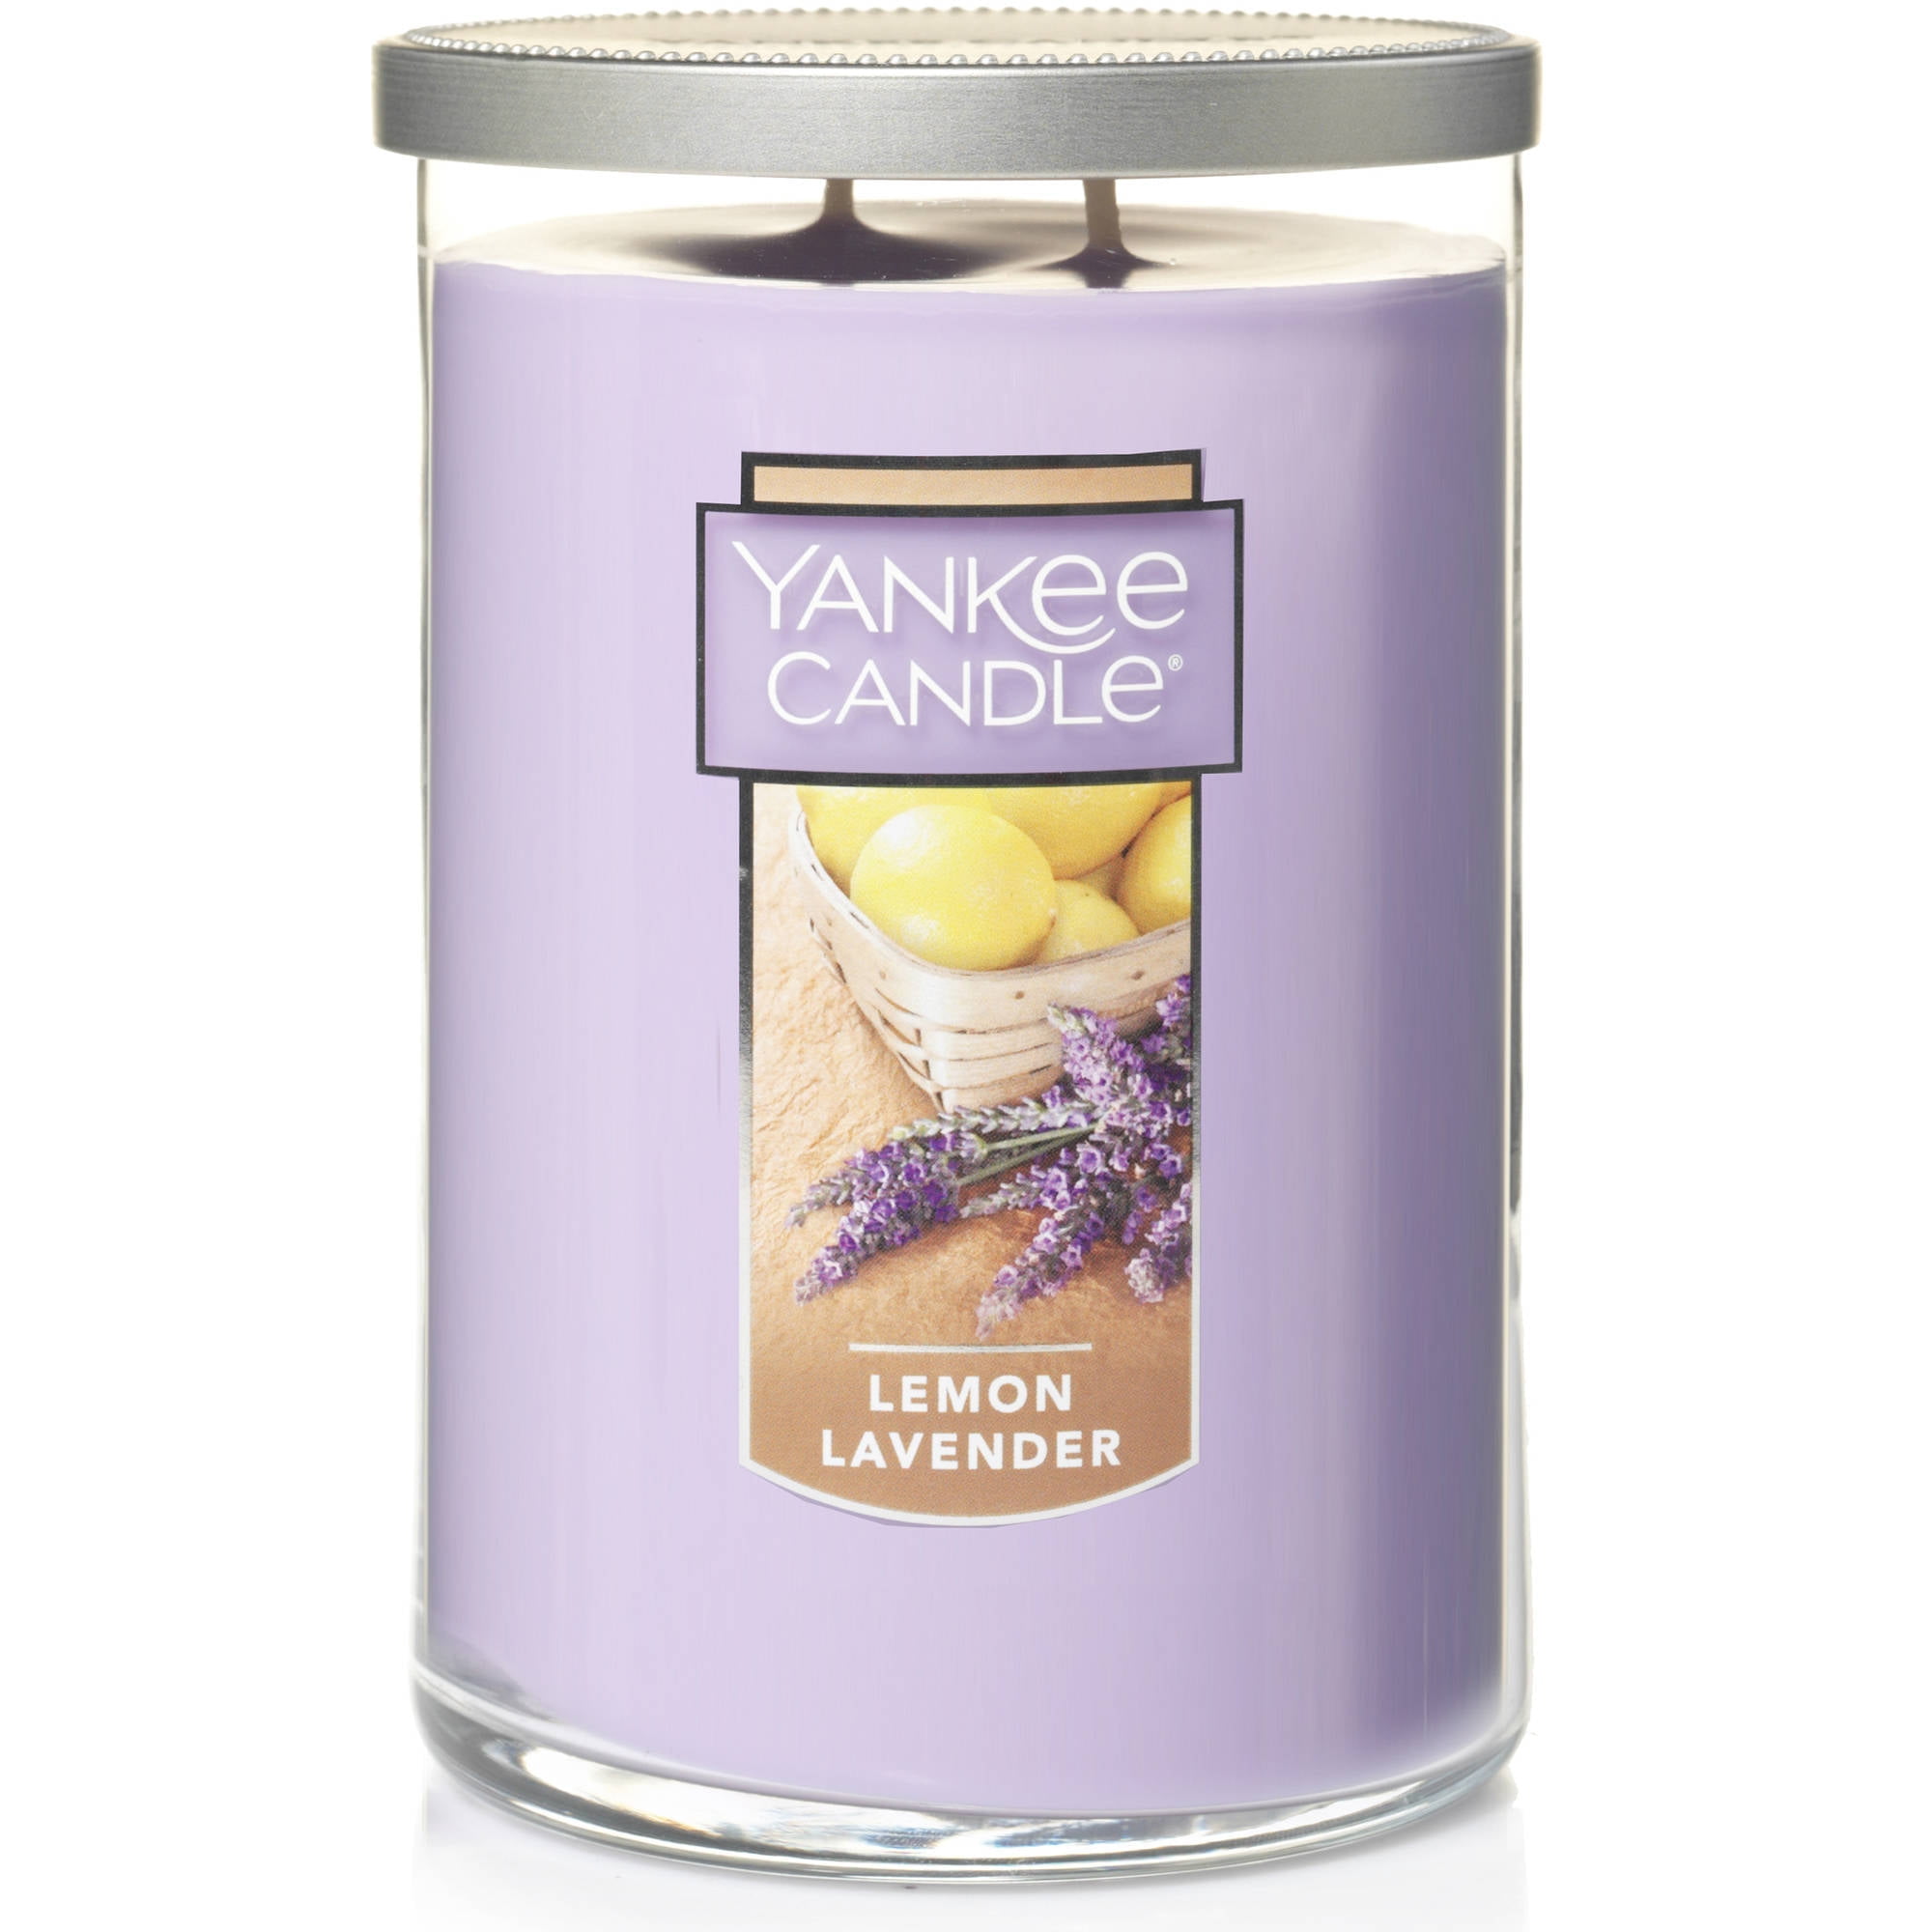 Yankee Candle Home Inspiration 30 Wax Melts: Sparkle & Shimmer, yankees,  candles, waxmelts, floral, lemon, scented, fragrances,, mothers day,  mother's day